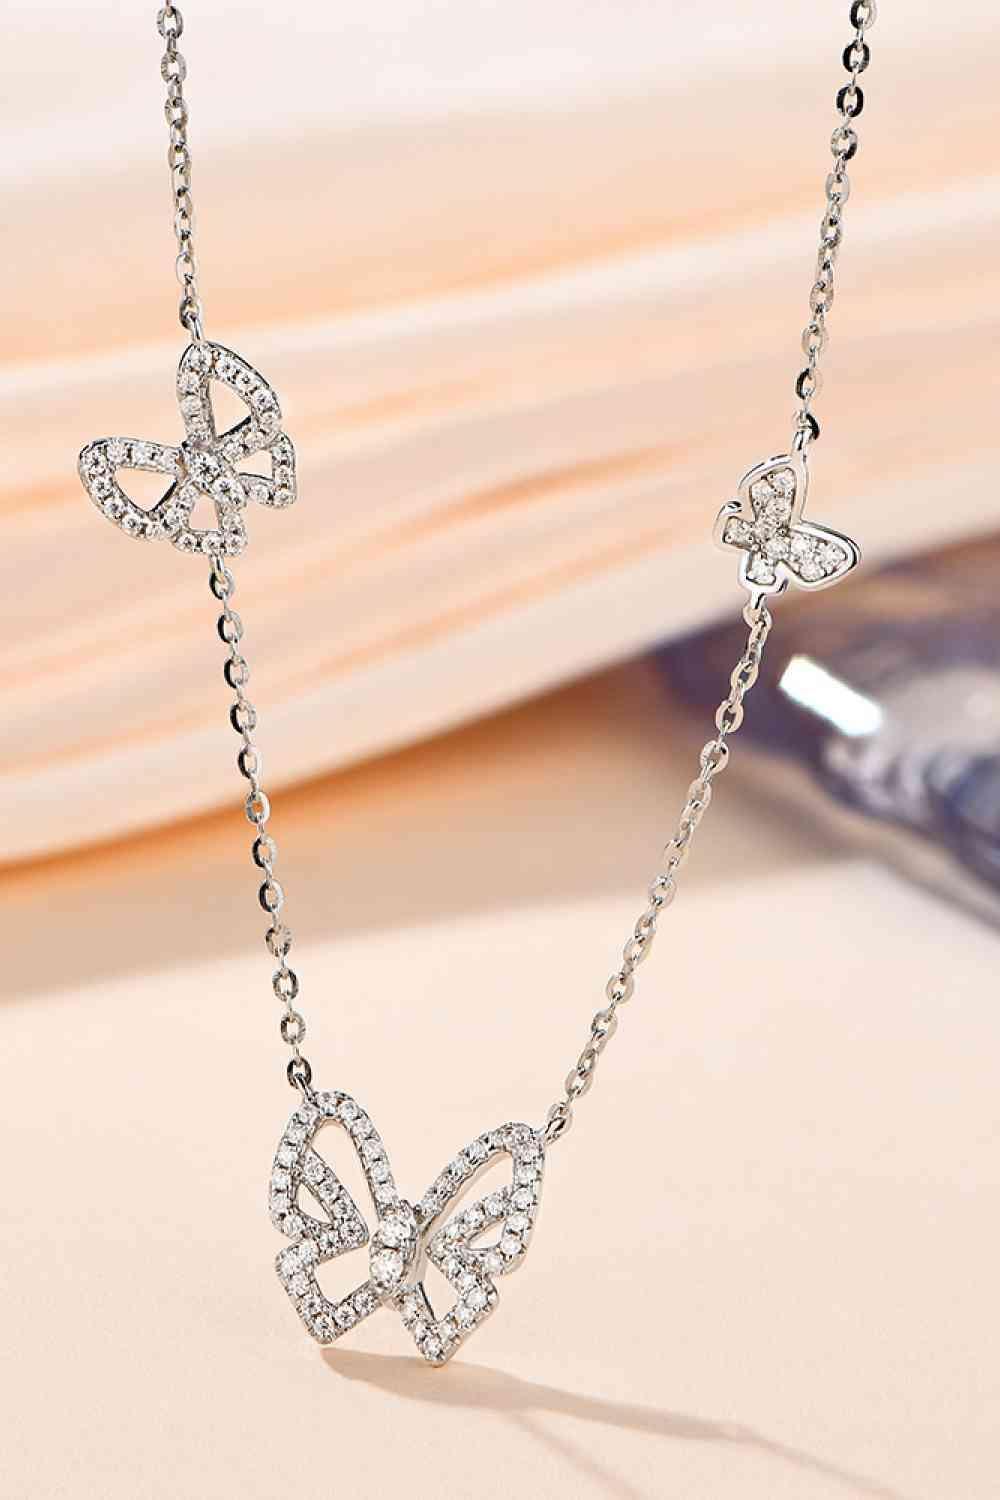 a necklace with a butterfly design on it